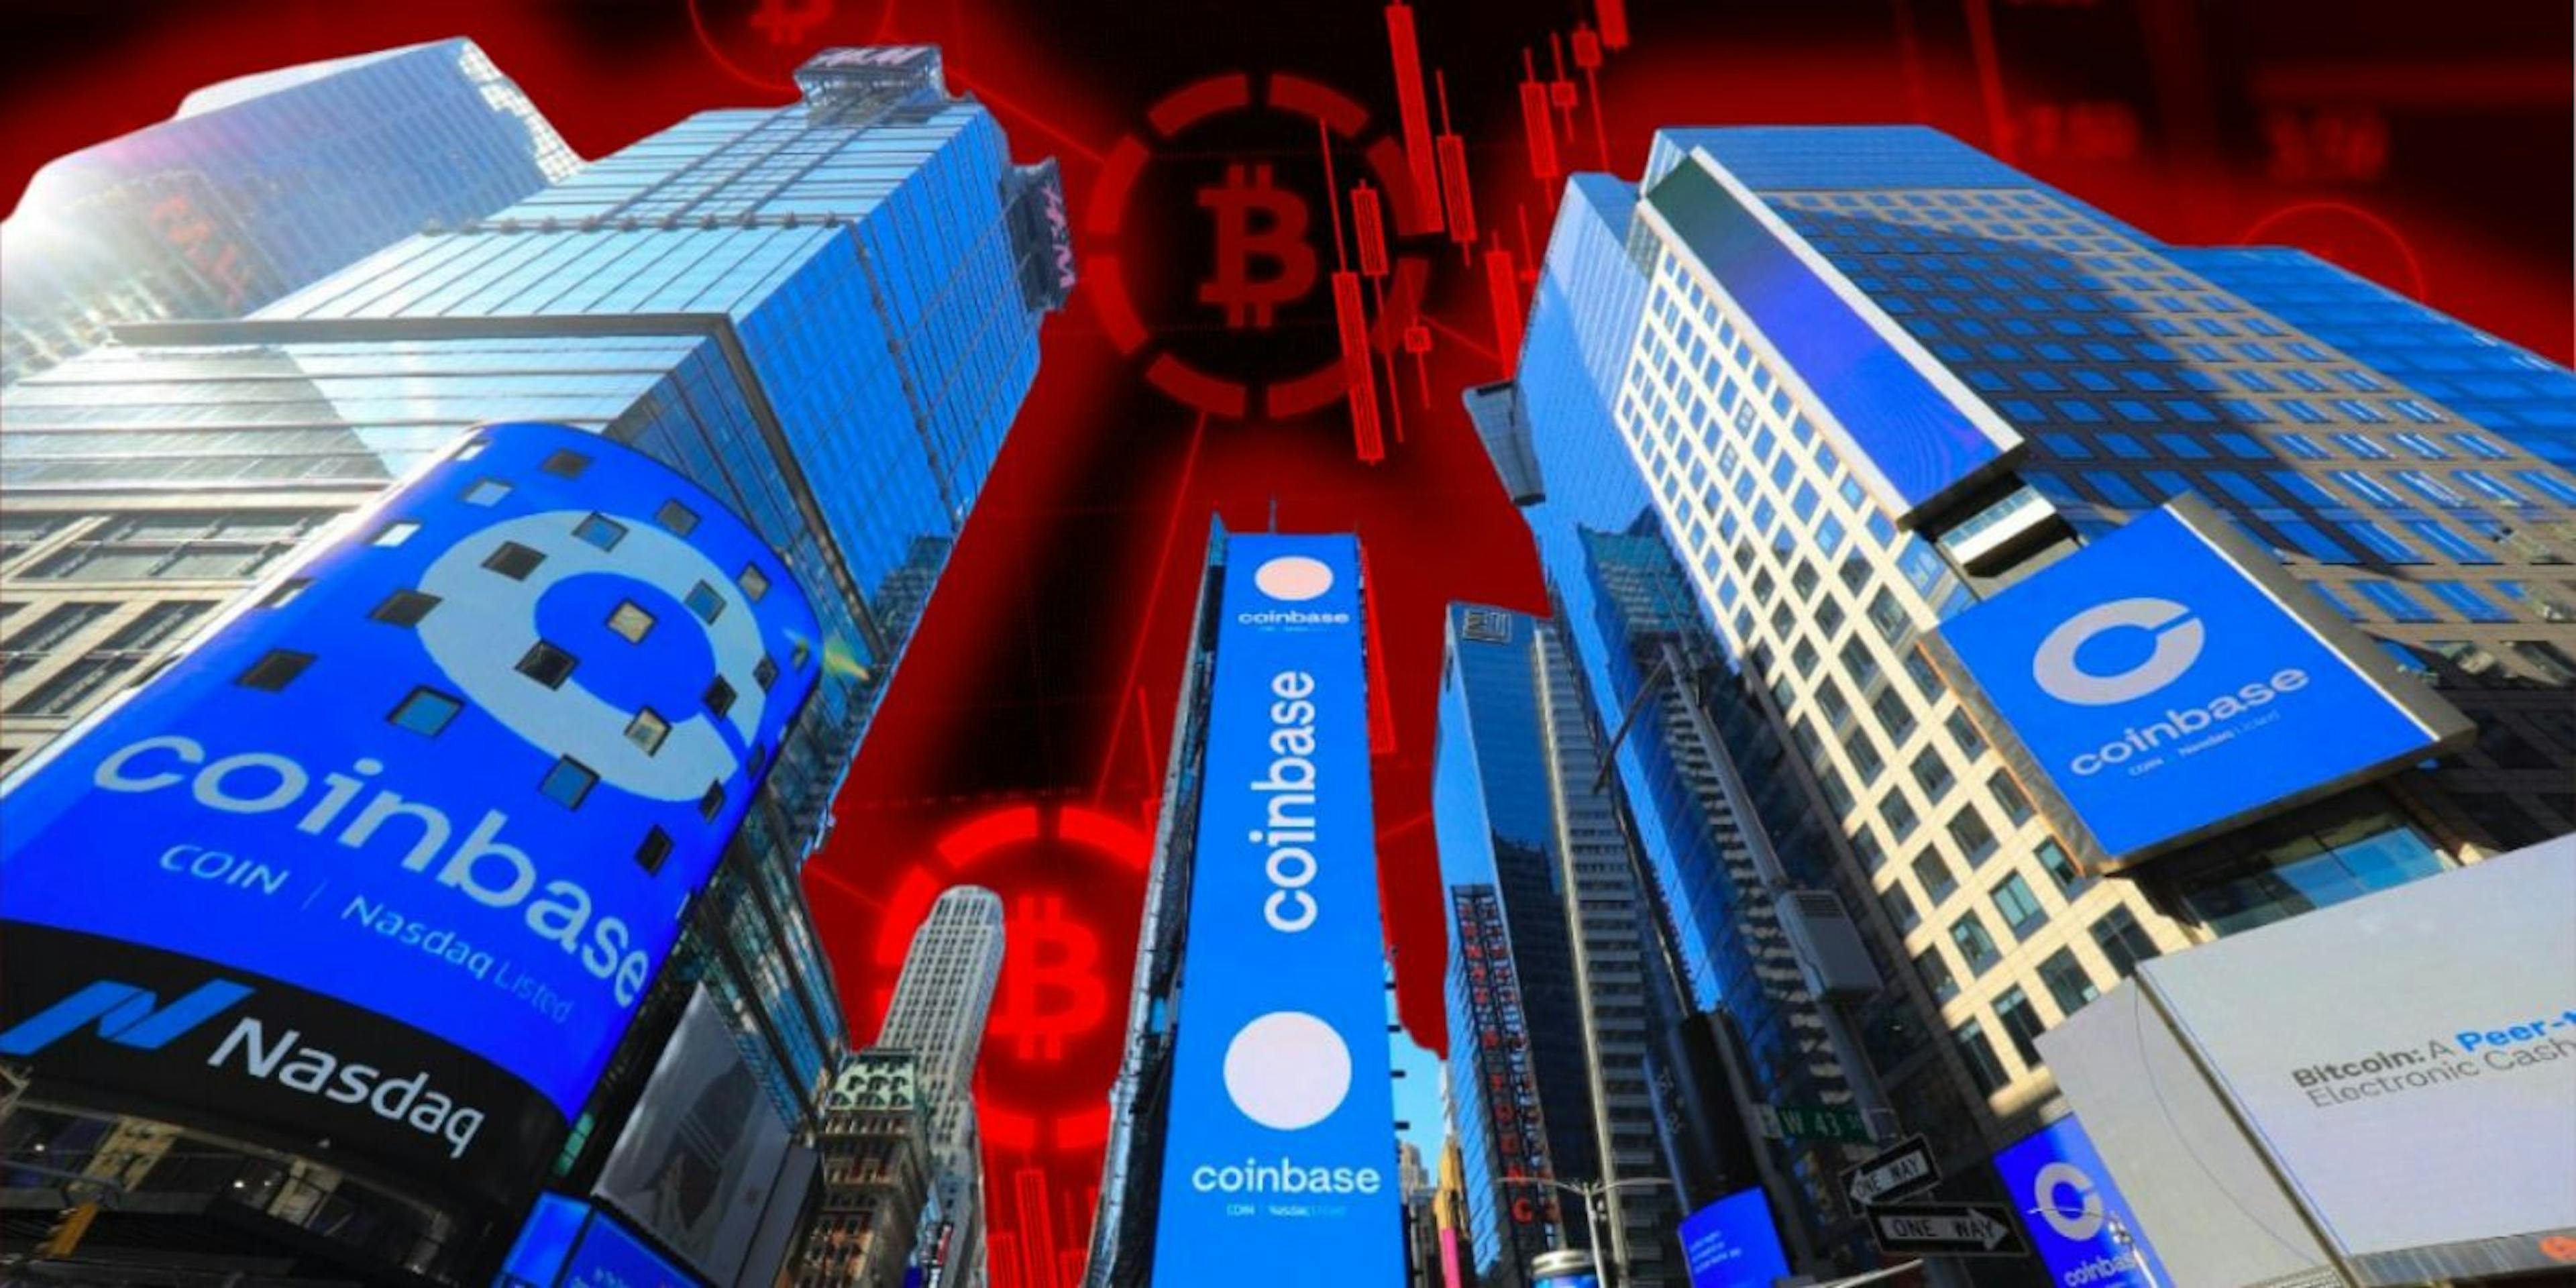 featured image - Coinbase Creates Alliance to Champion Crypto Policy